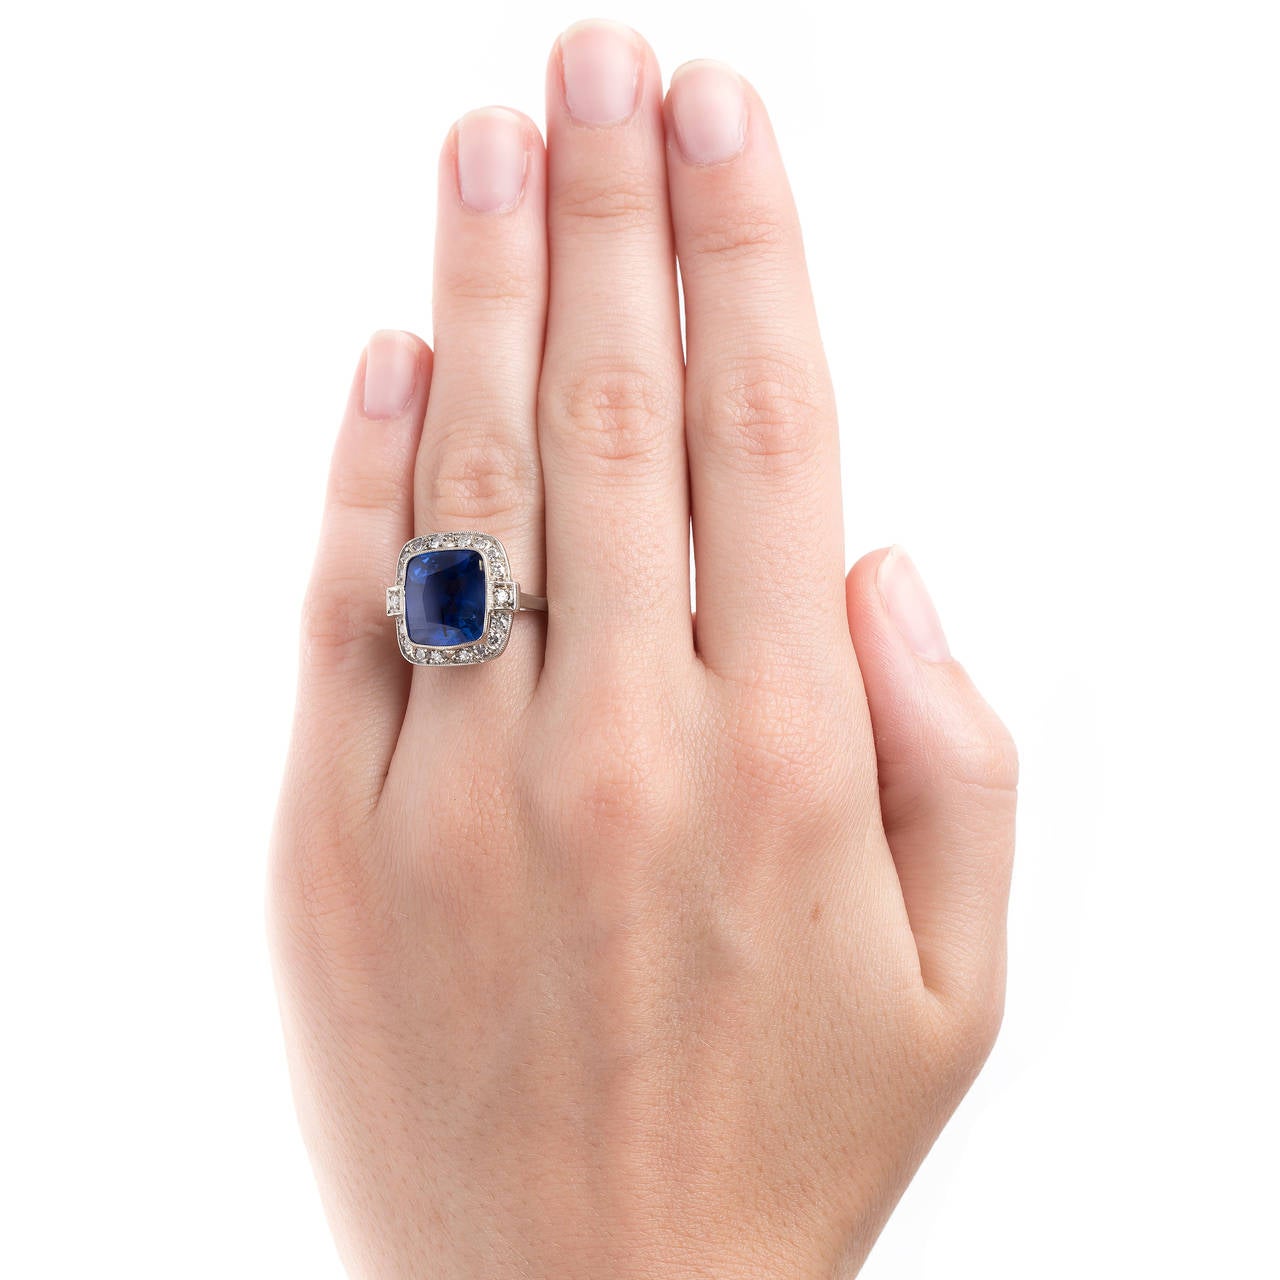 Late Art Deco GIA Cert 6.82 Carat Unheated Sapphire Diamond Gold Ring In Excellent Condition For Sale In Los Angeles, CA